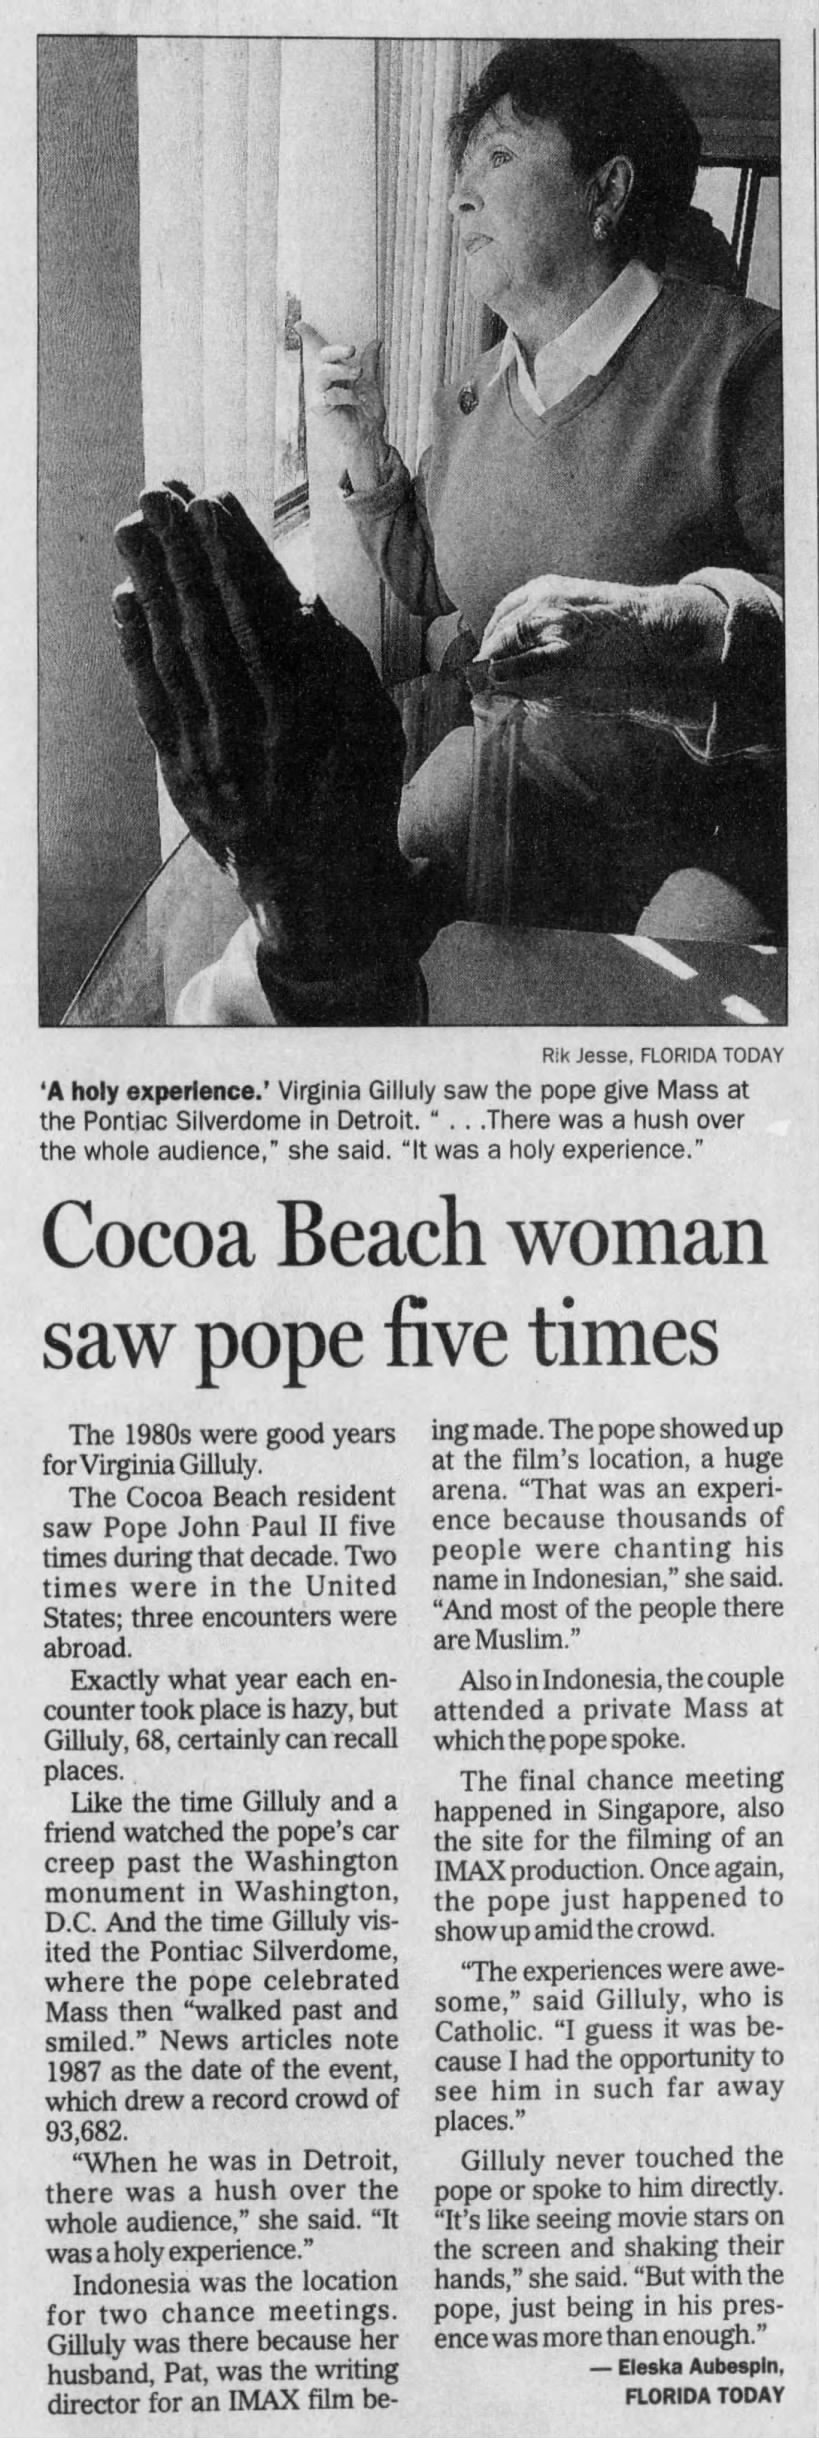 Cocoa Beach woman saw pope five times (Florida Today 4/3/2005)